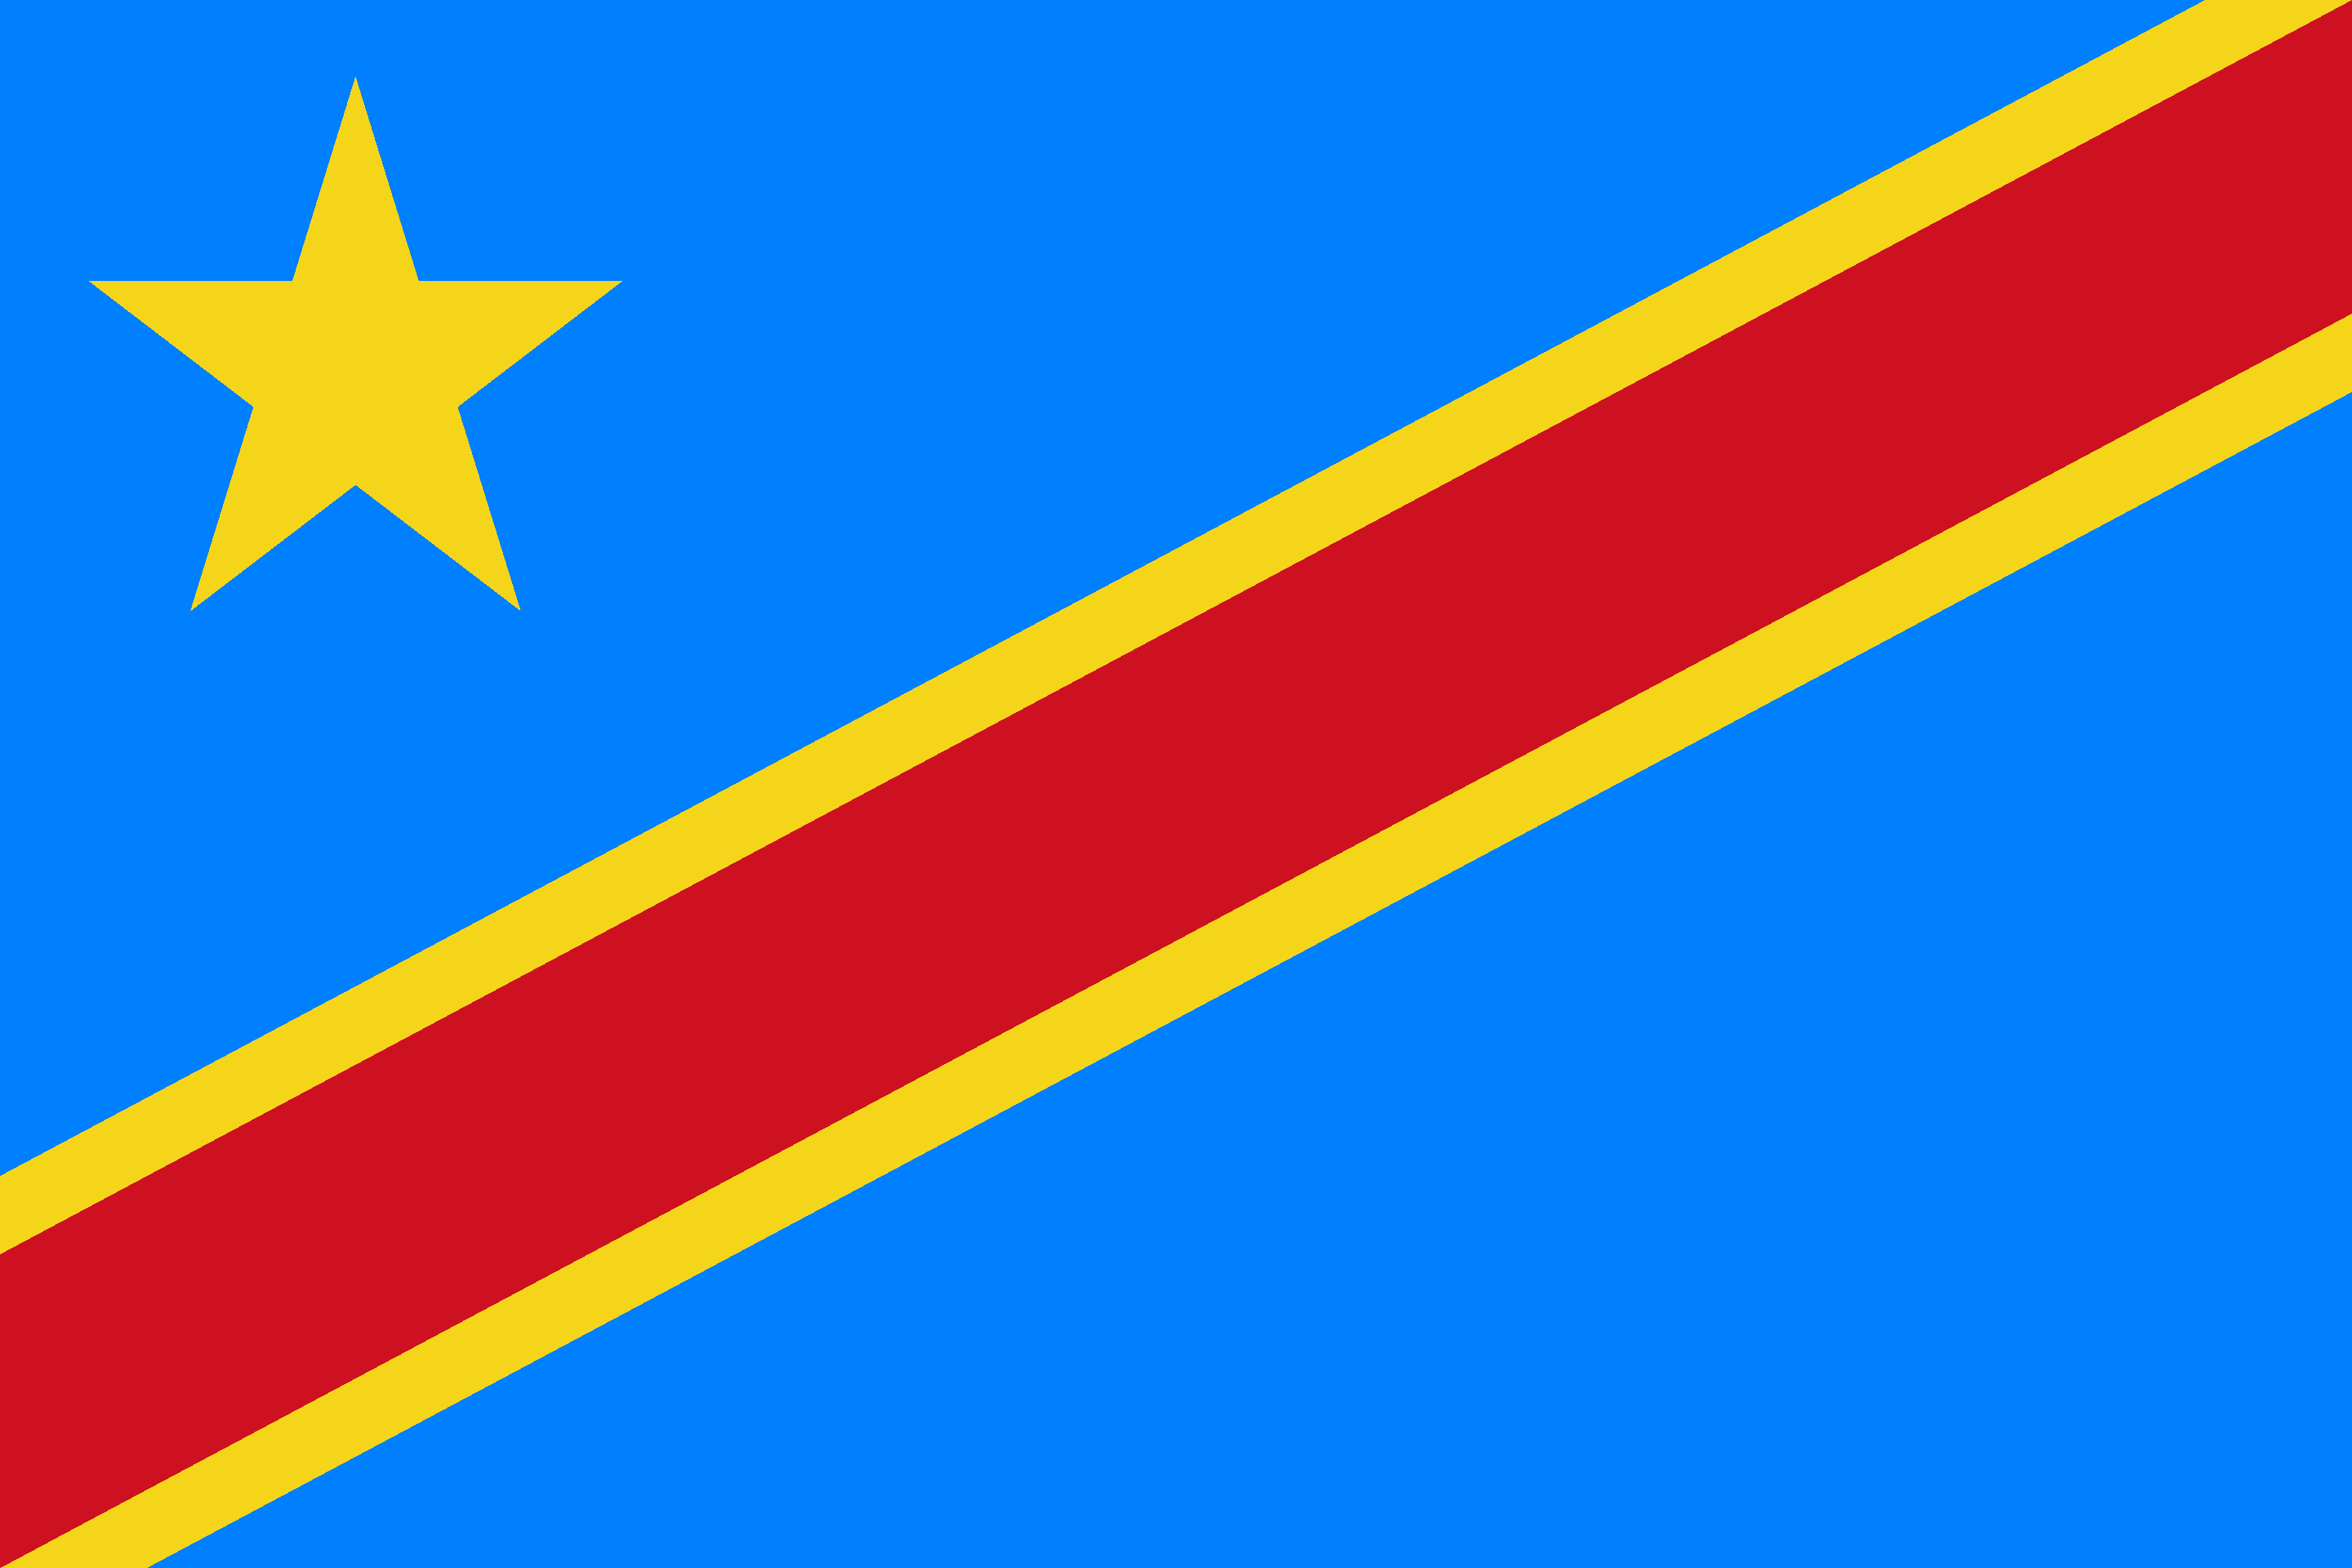 Drone Laws in DR Congo